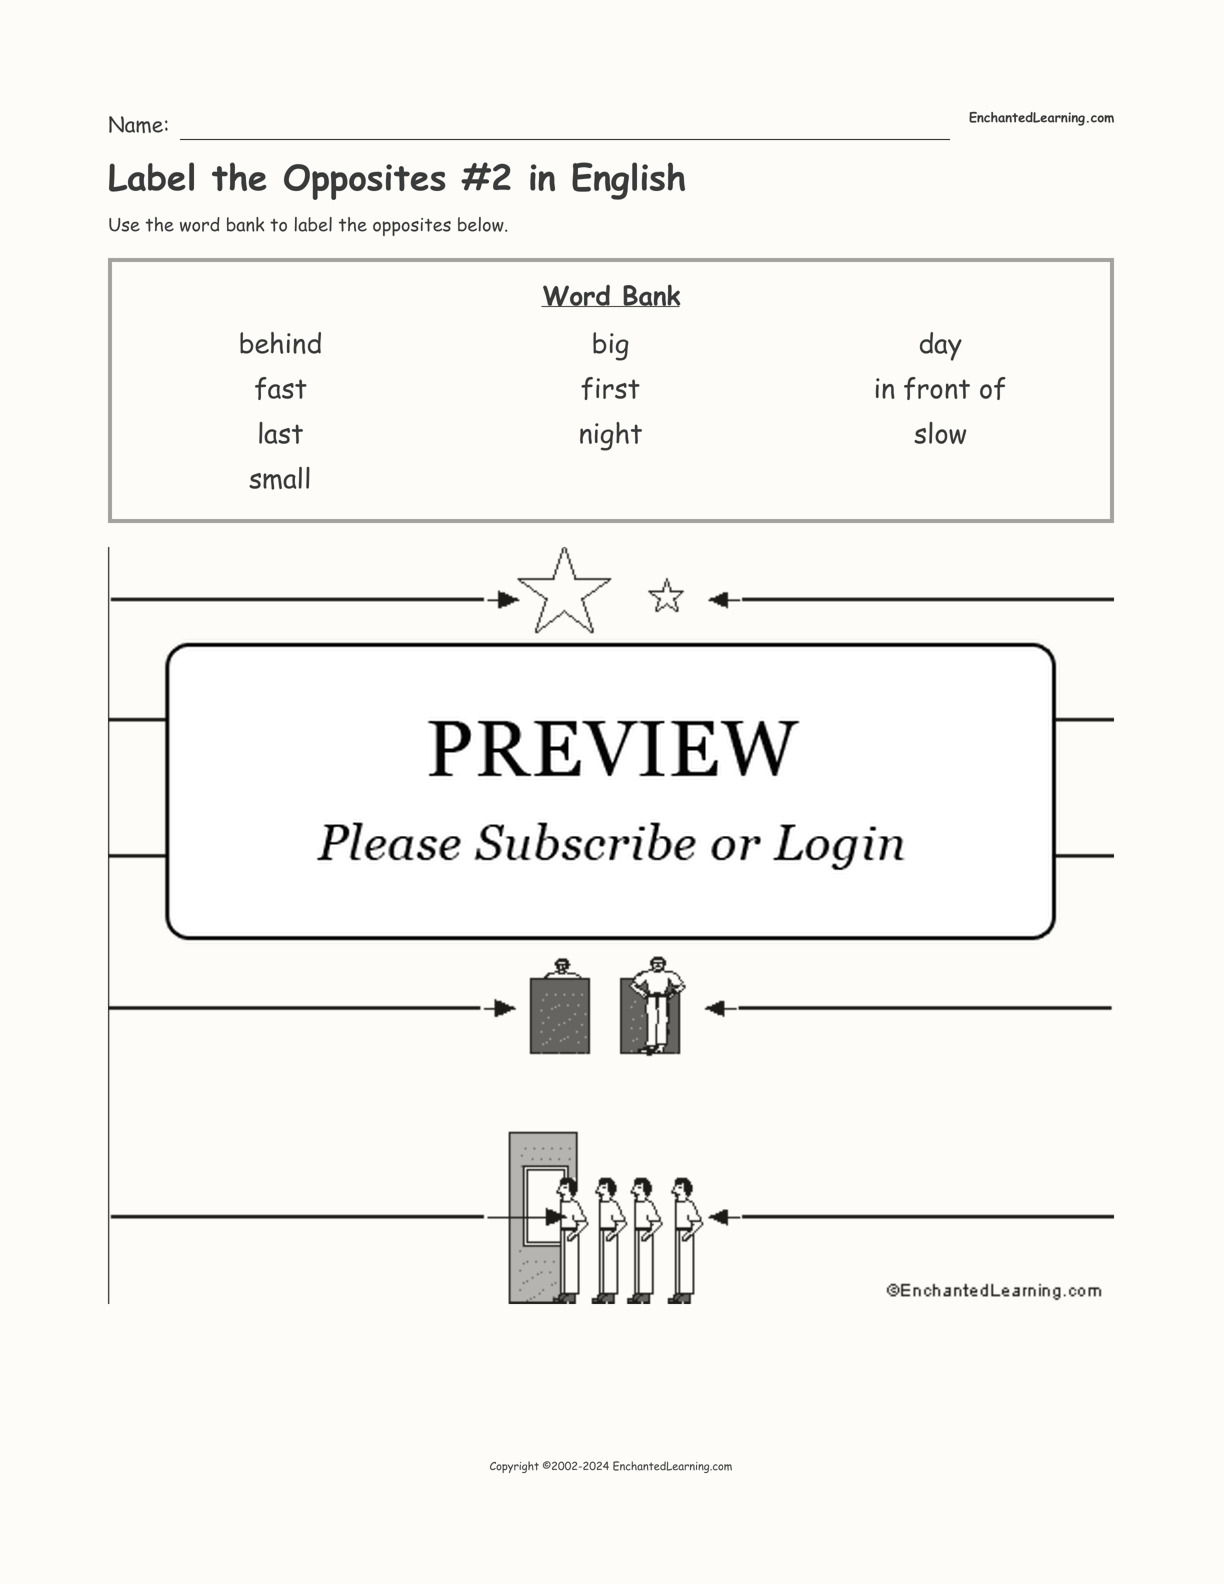 Label the Opposites #2 in English interactive worksheet page 1